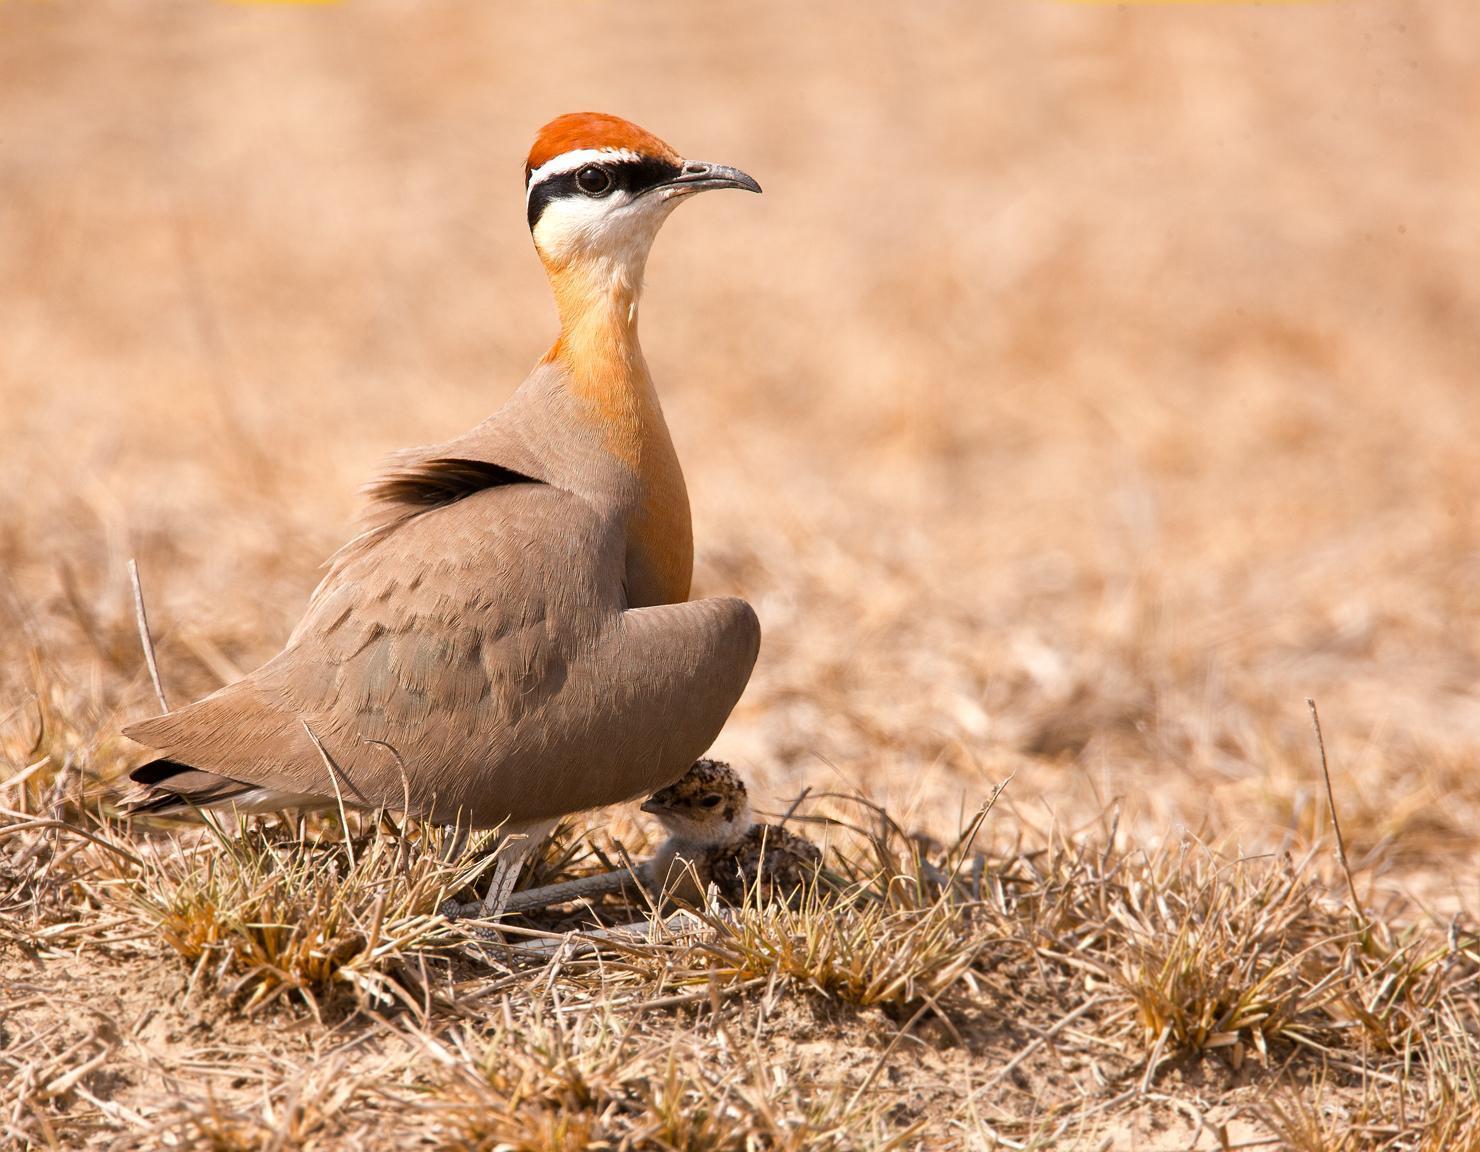 Indian Courser Photo by Anand Arya